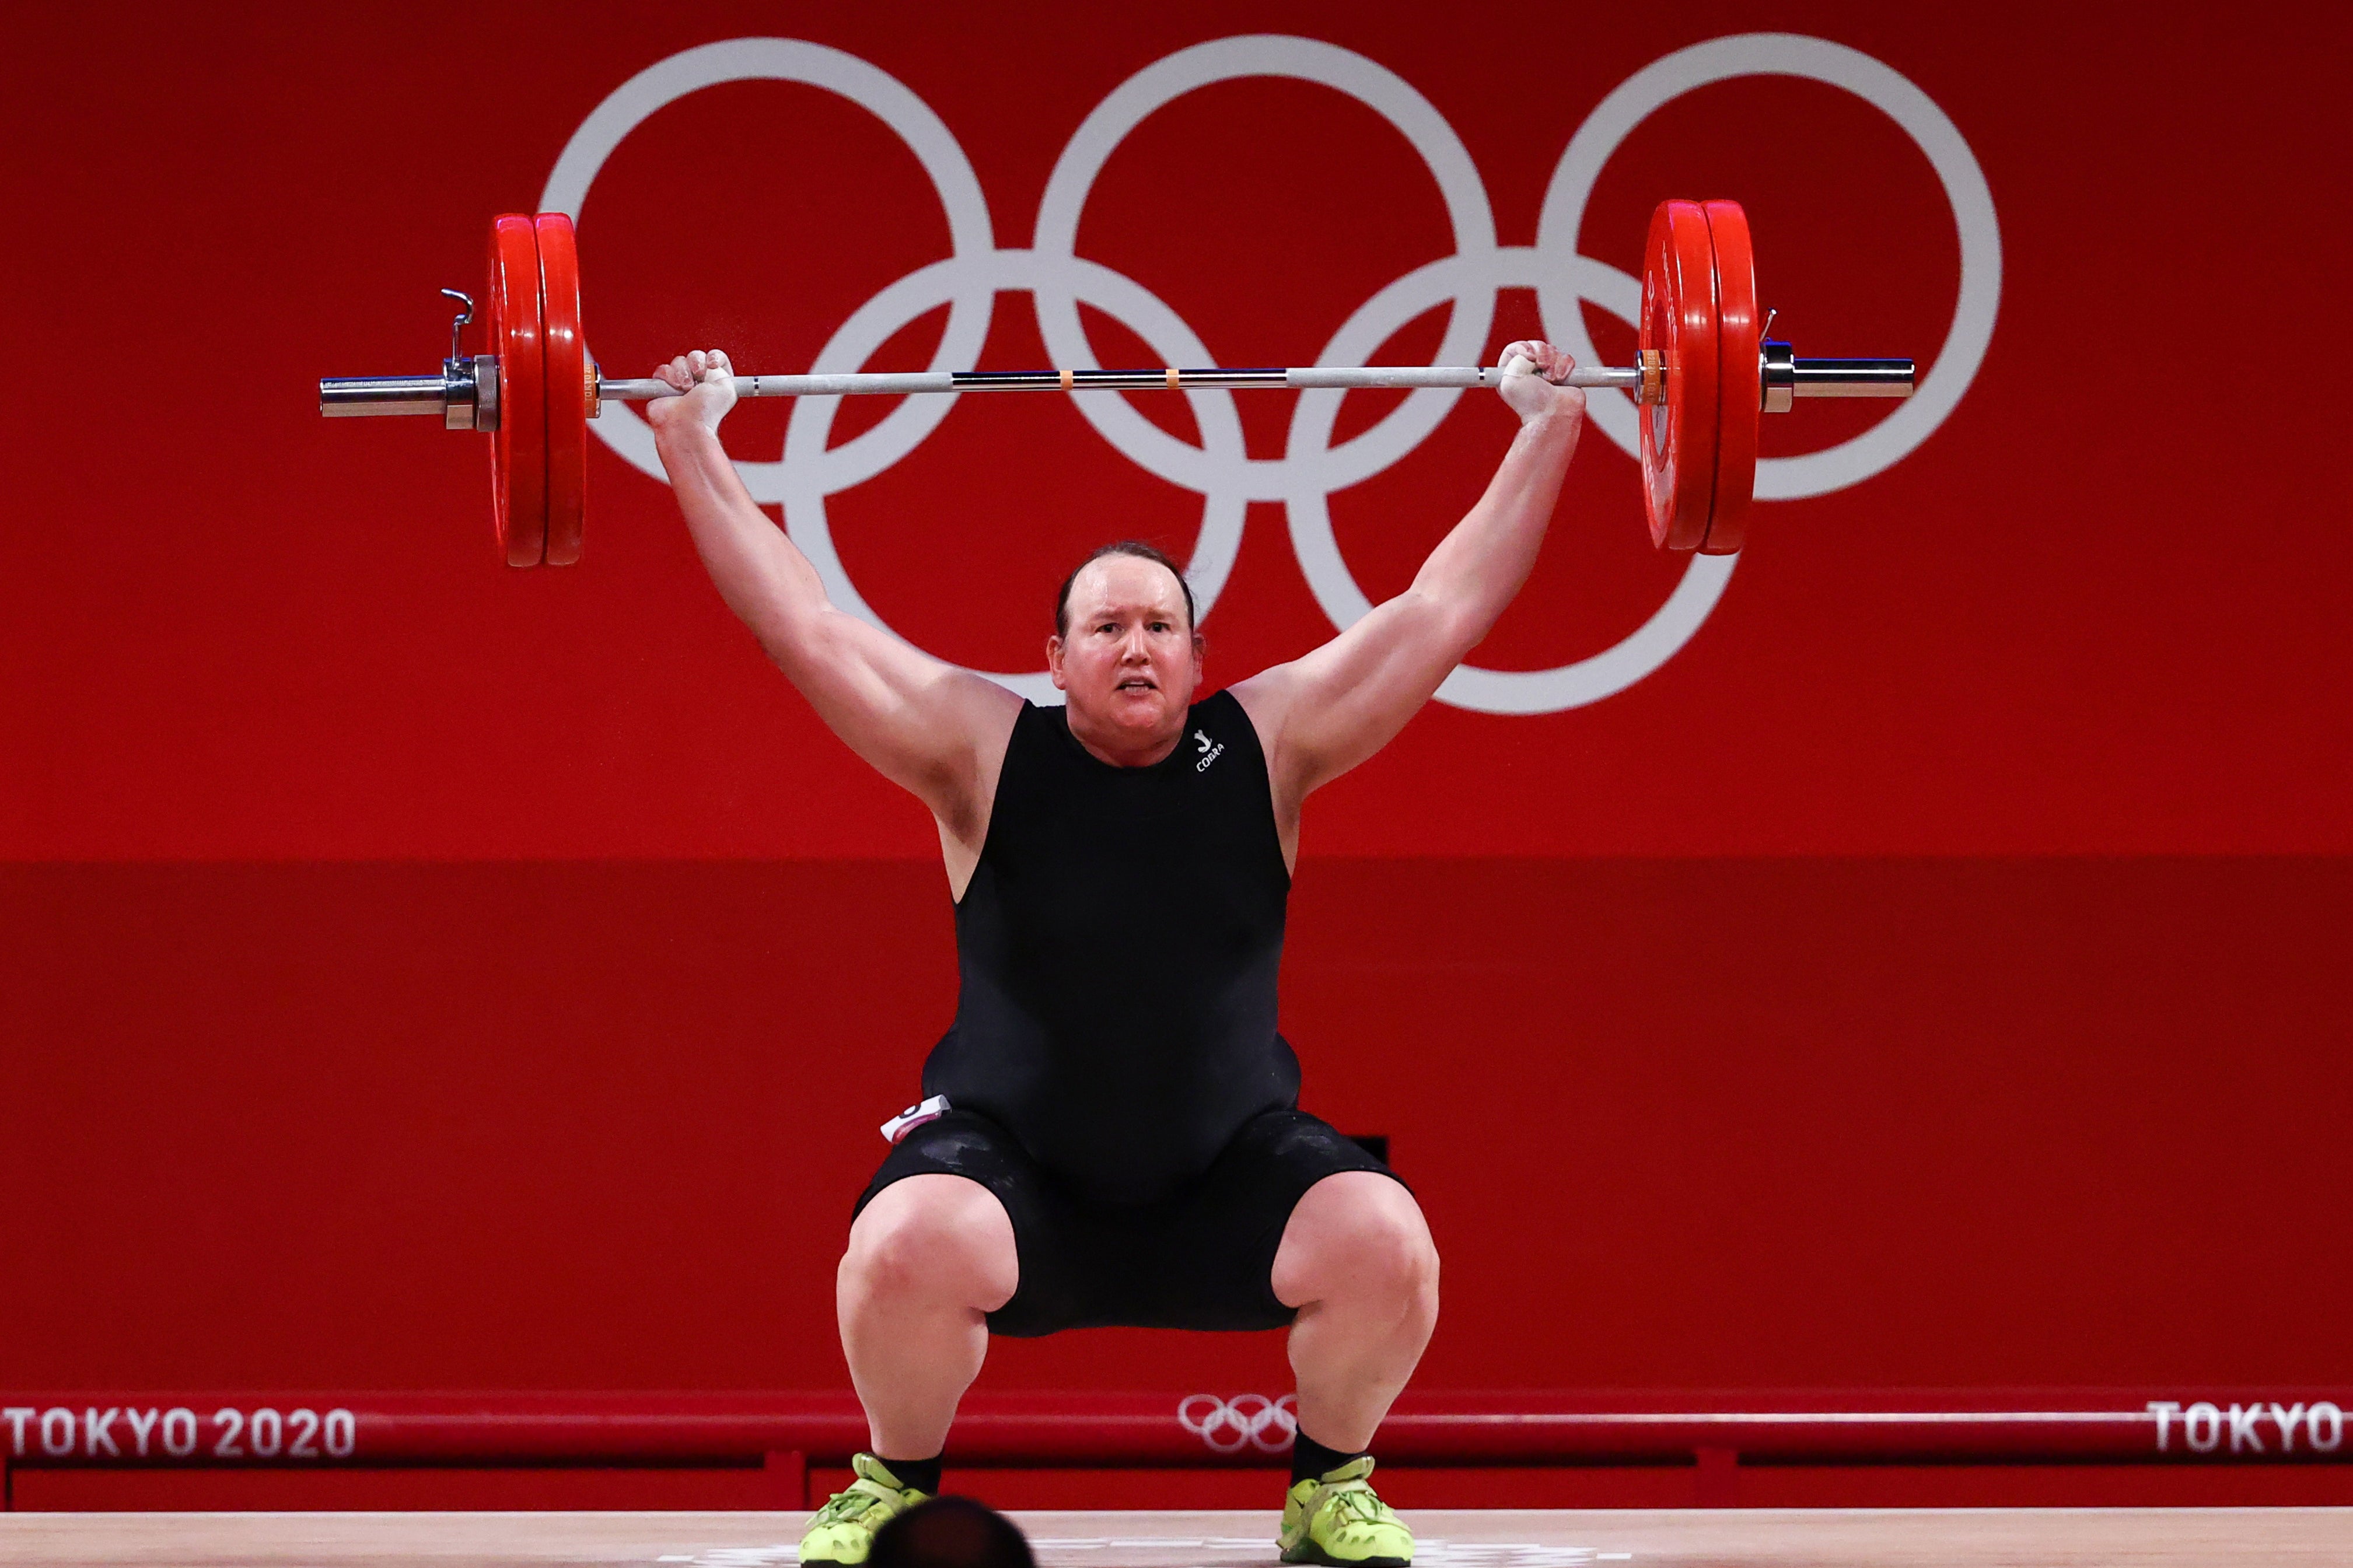 Laurel Hubbard failed to secure a successful snatch lift